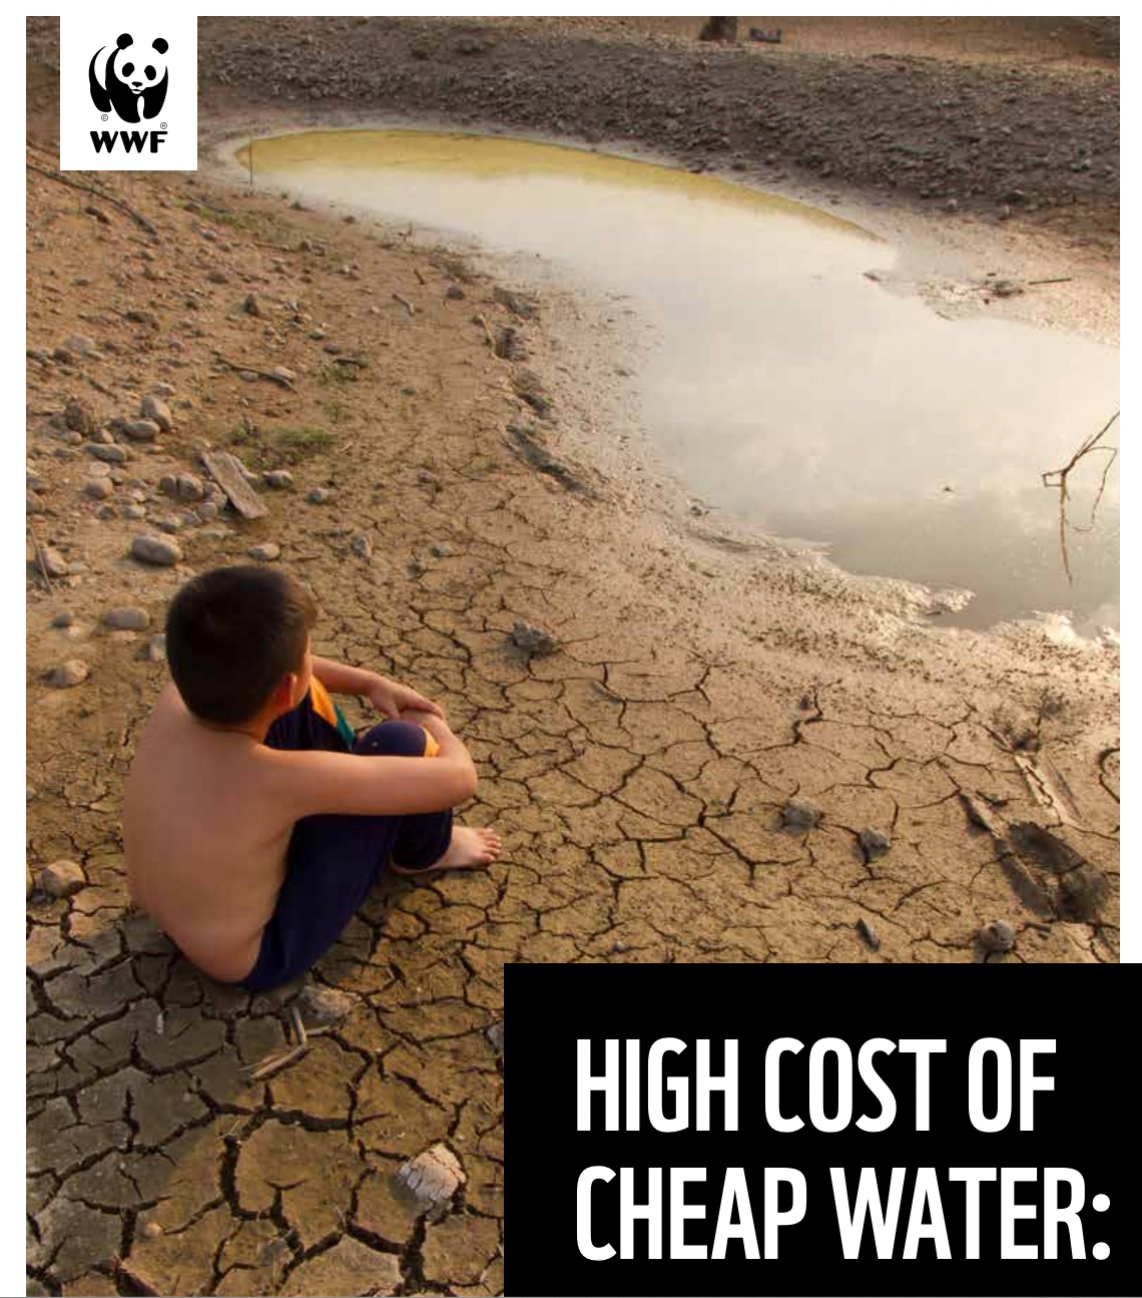 The High Cost of Cheap Water